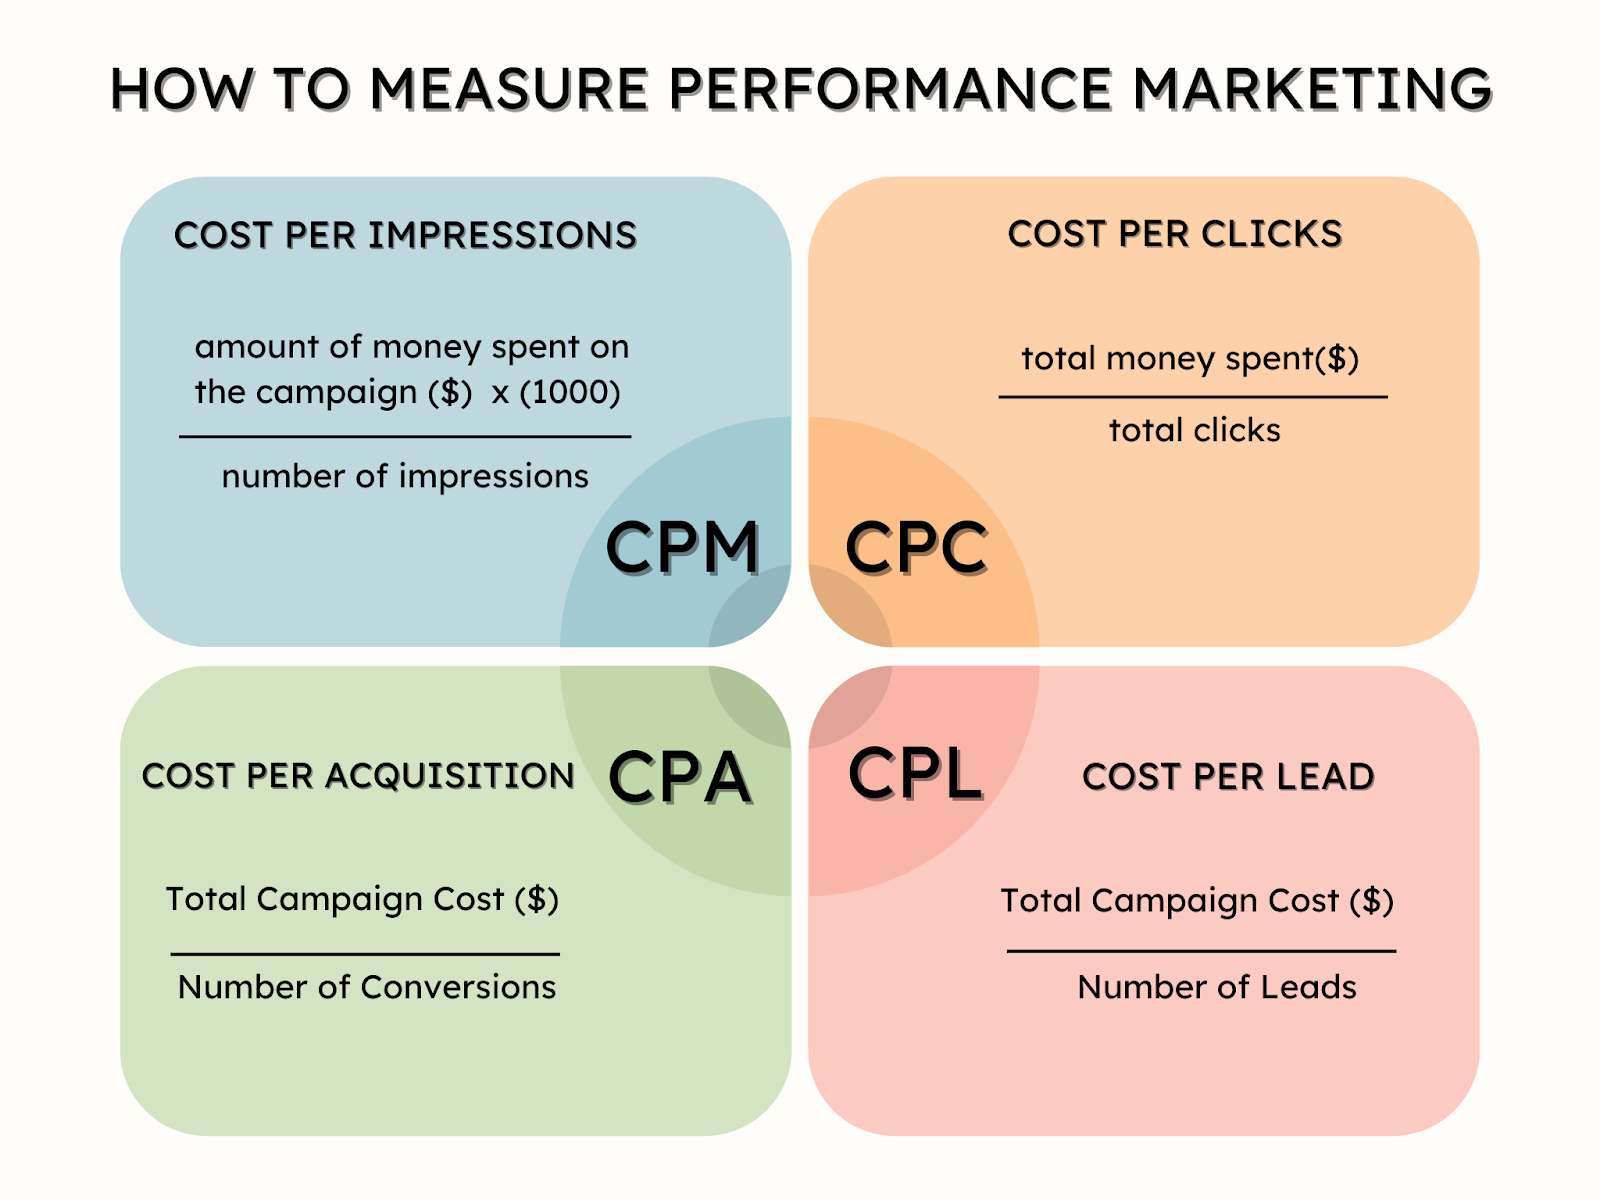 How to Measure Performance Marketing